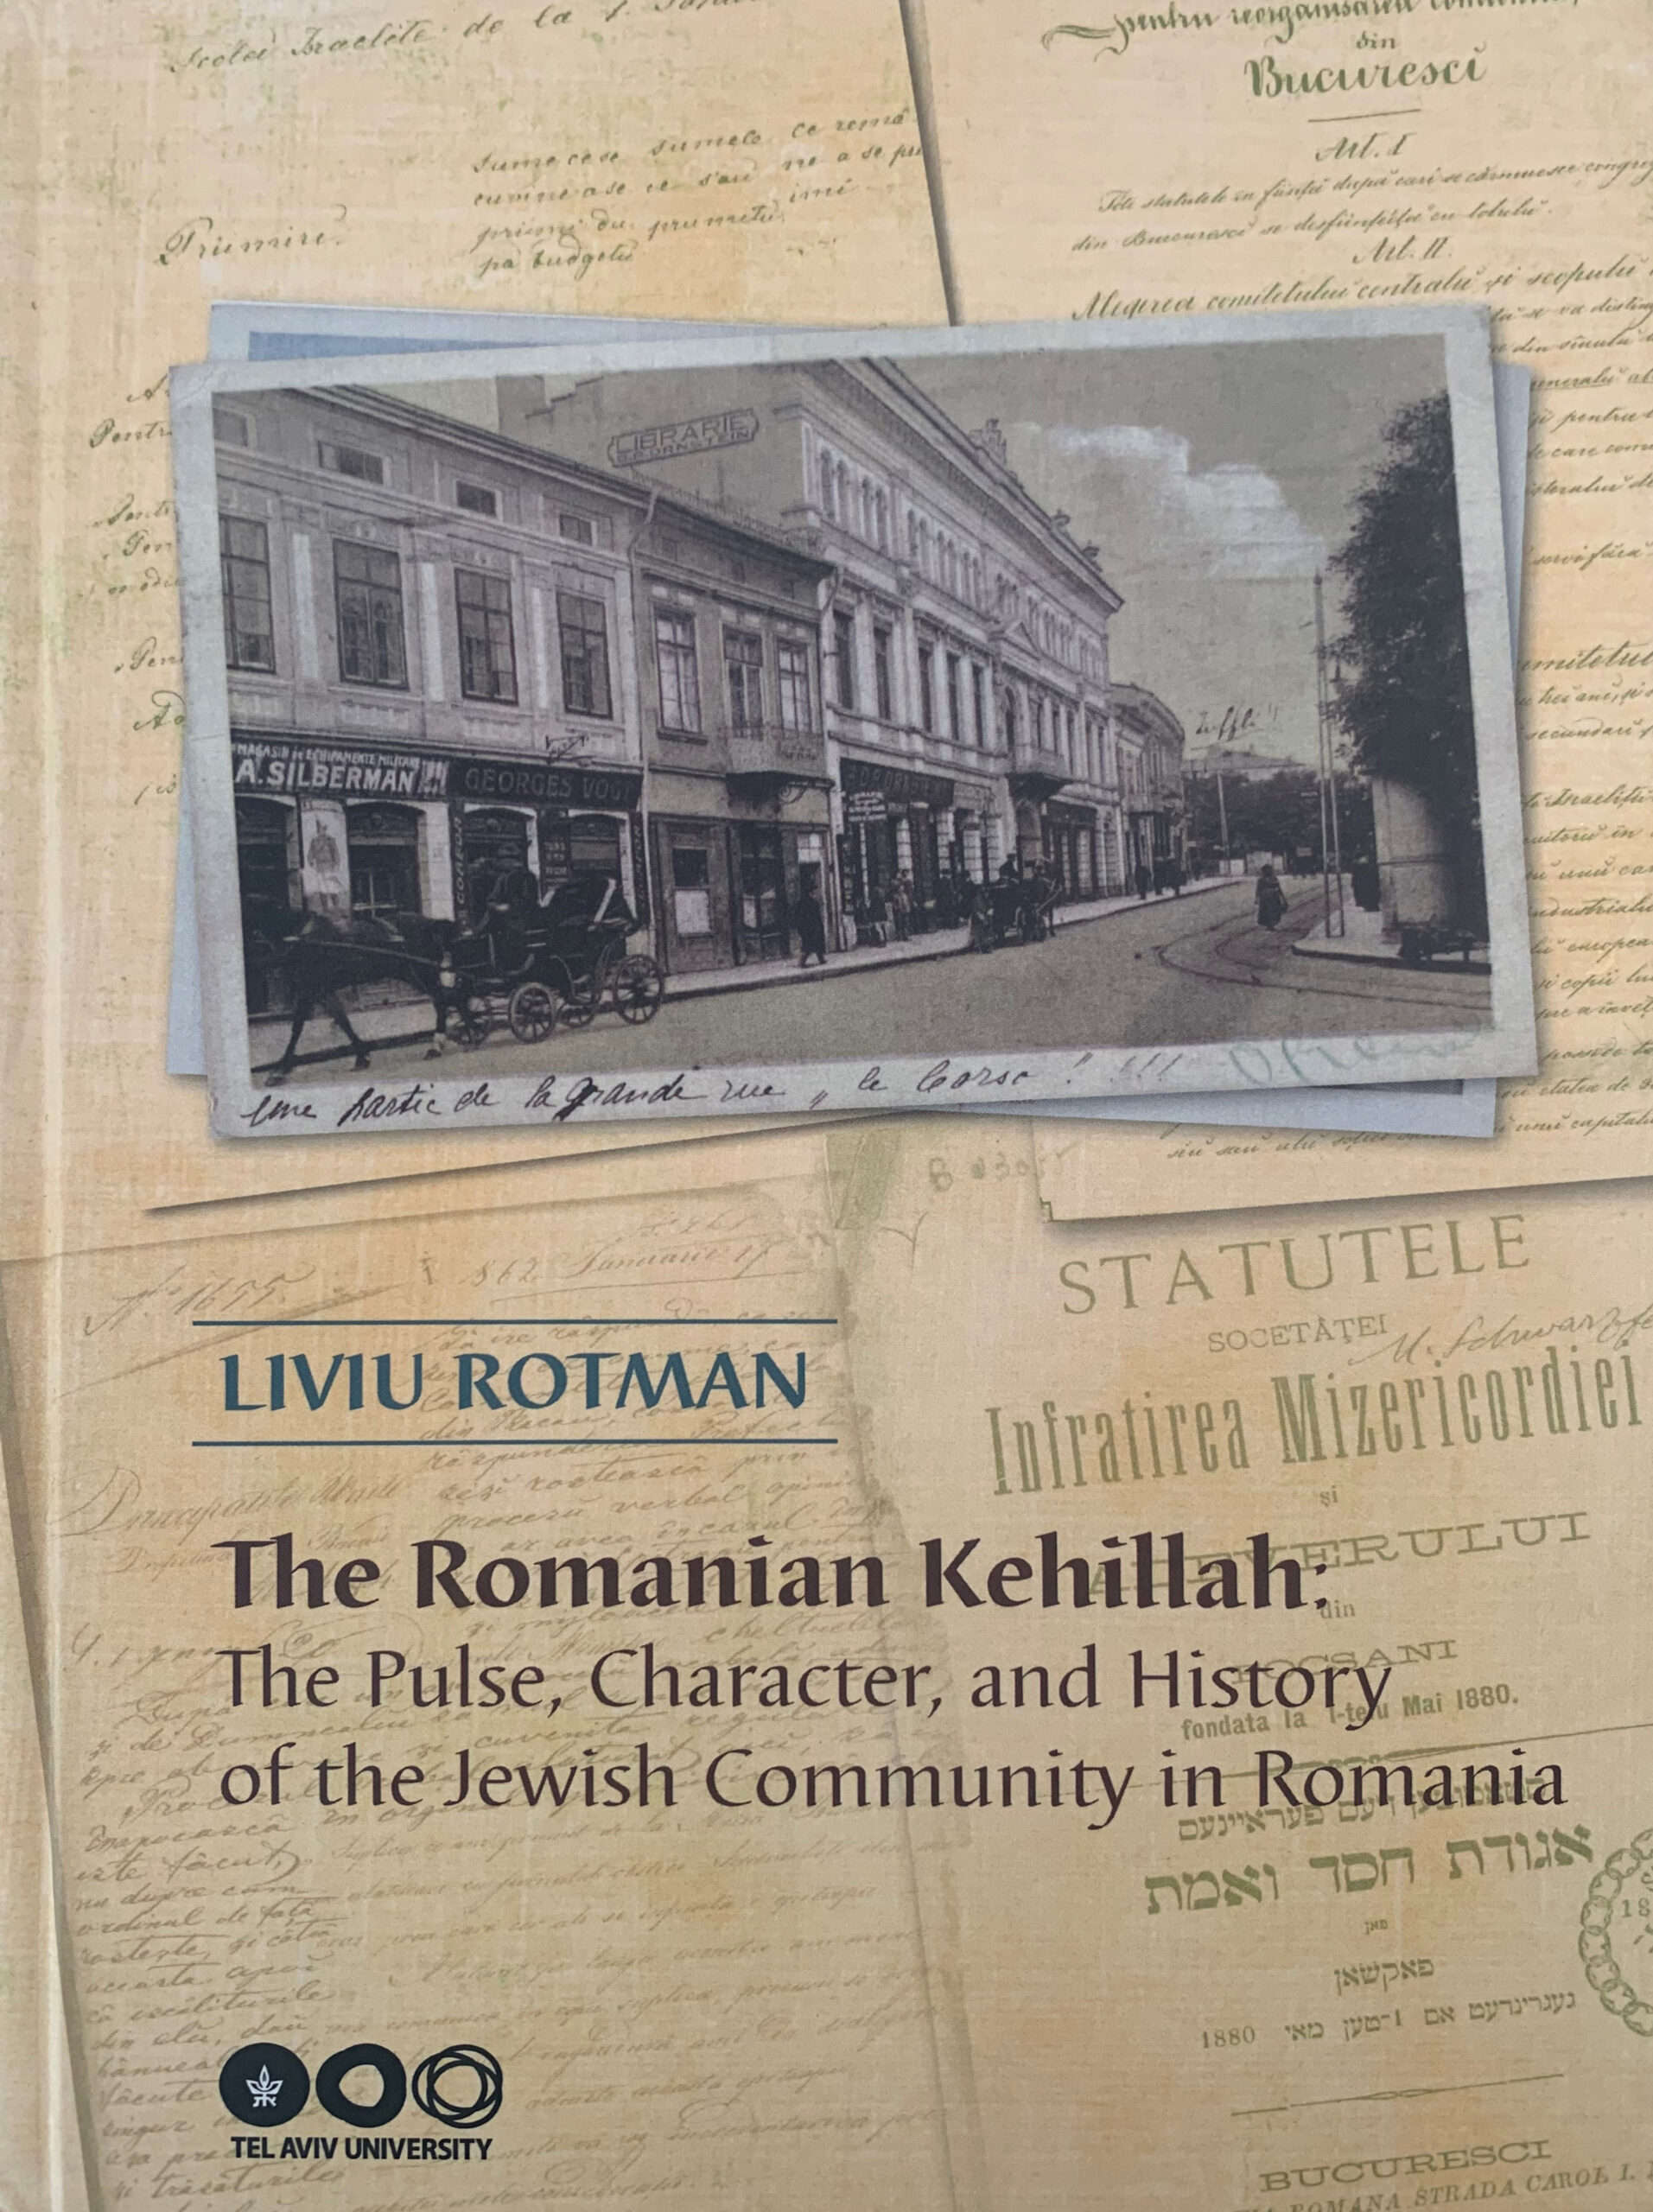 The Romanian Kehillah: The Pulse, Character, and History of the Jewish Community in Romania